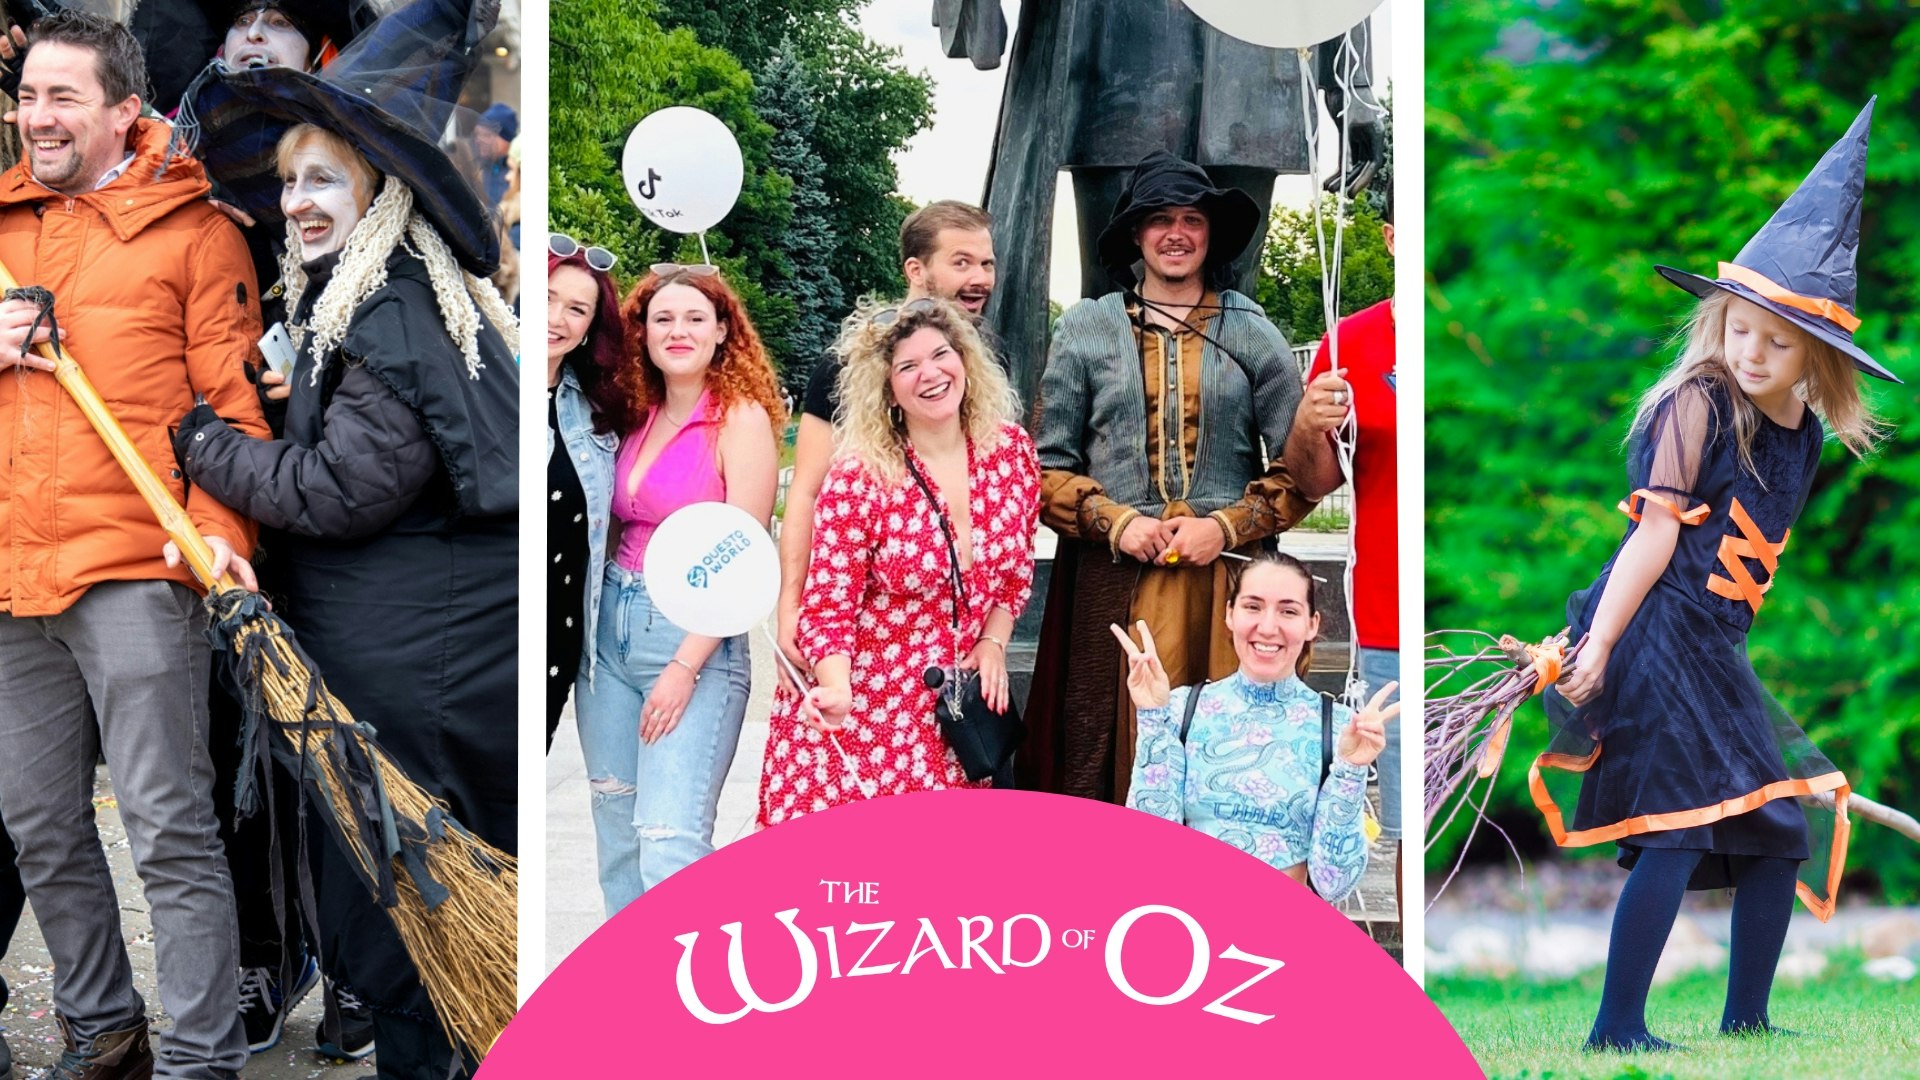 The Wizard of Oz in Manchester